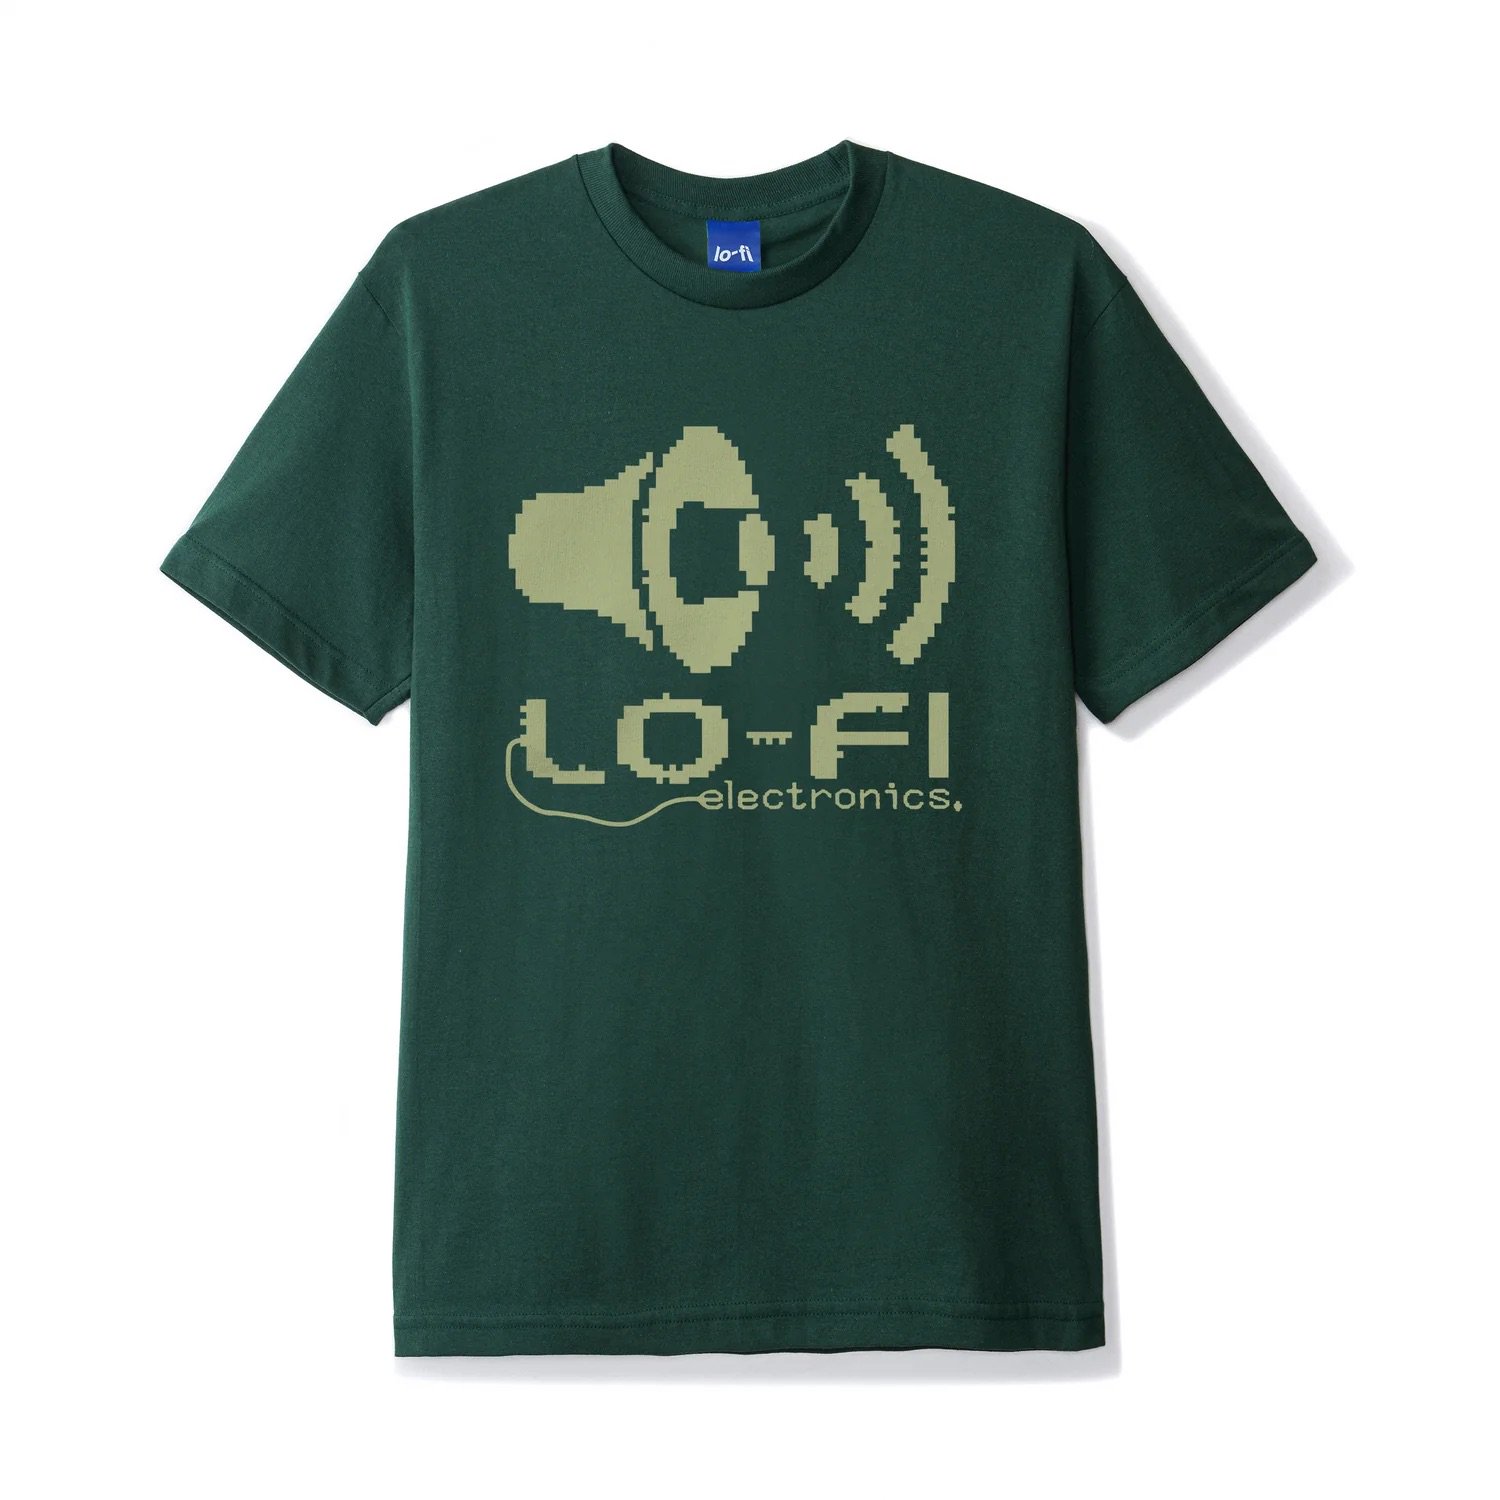 Lo-Fi<br>Nature Sounds Tee<br>